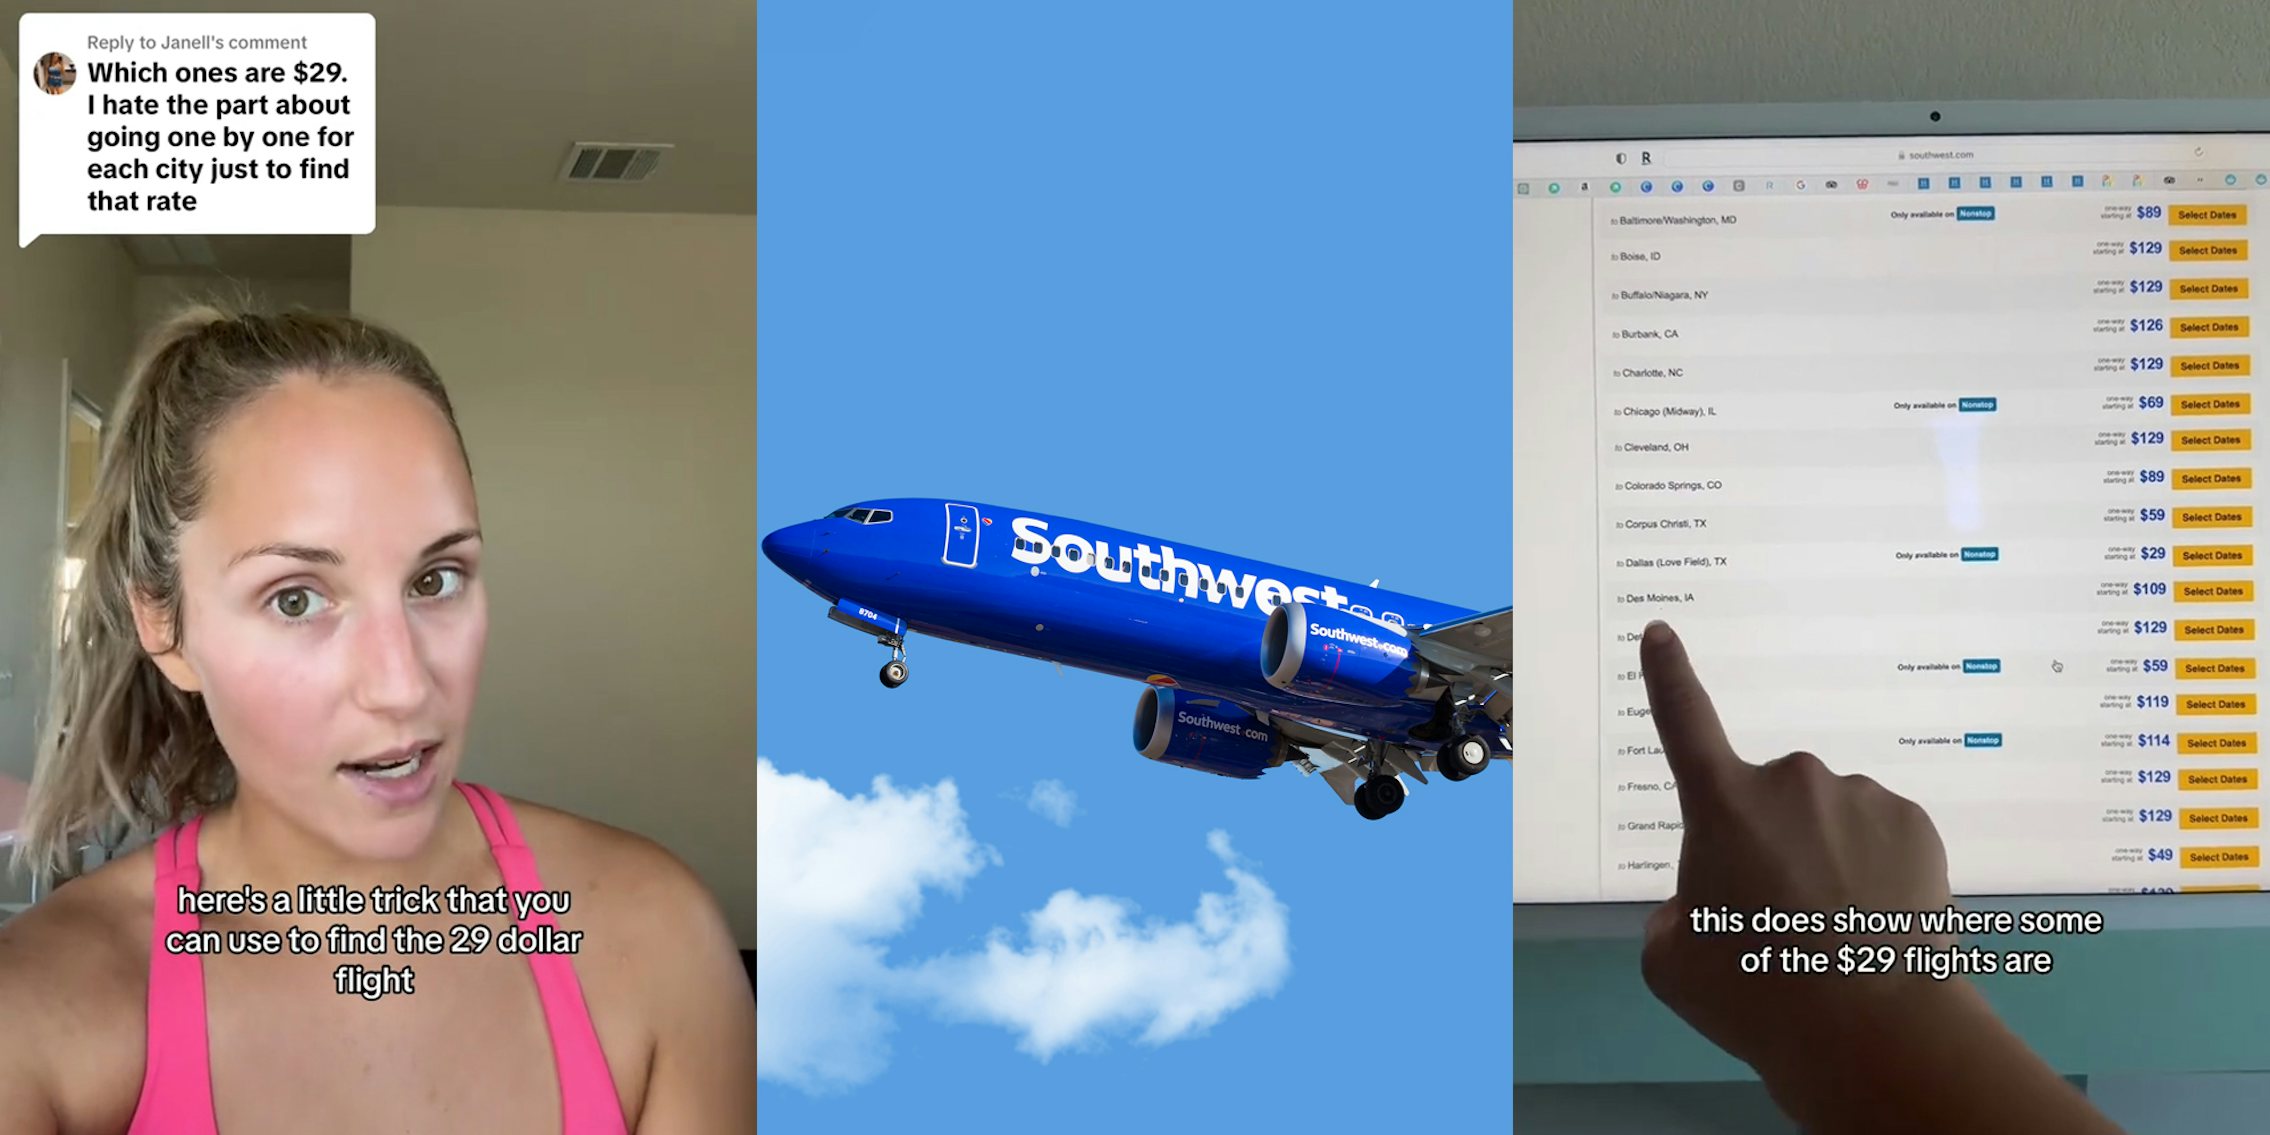 woman speaking with caption 'here's a little trick that you can use to find the 29 dollar flight' (l) Southwest airlines plane in blue sky (c) Southwest Airlines website showing flights with caption 'this does show where some of the $29 flights are' (r)